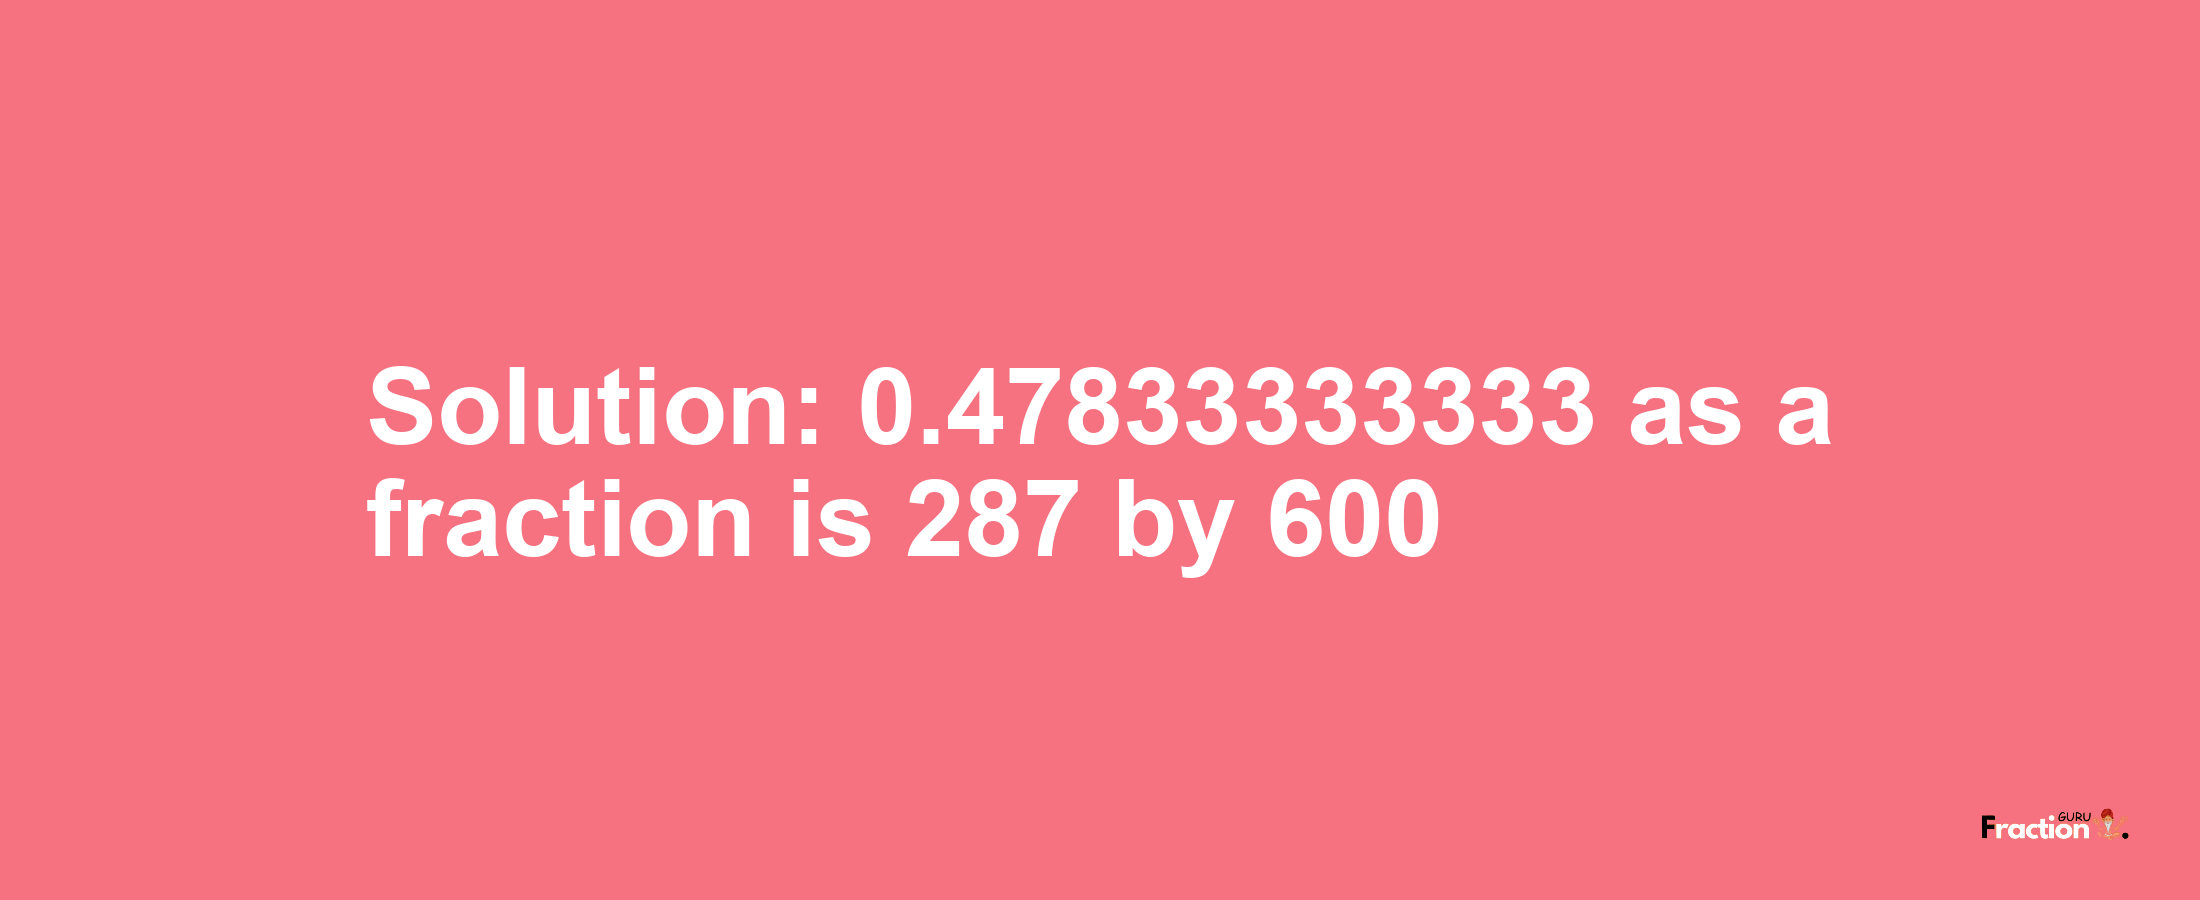 Solution:0.47833333333 as a fraction is 287/600